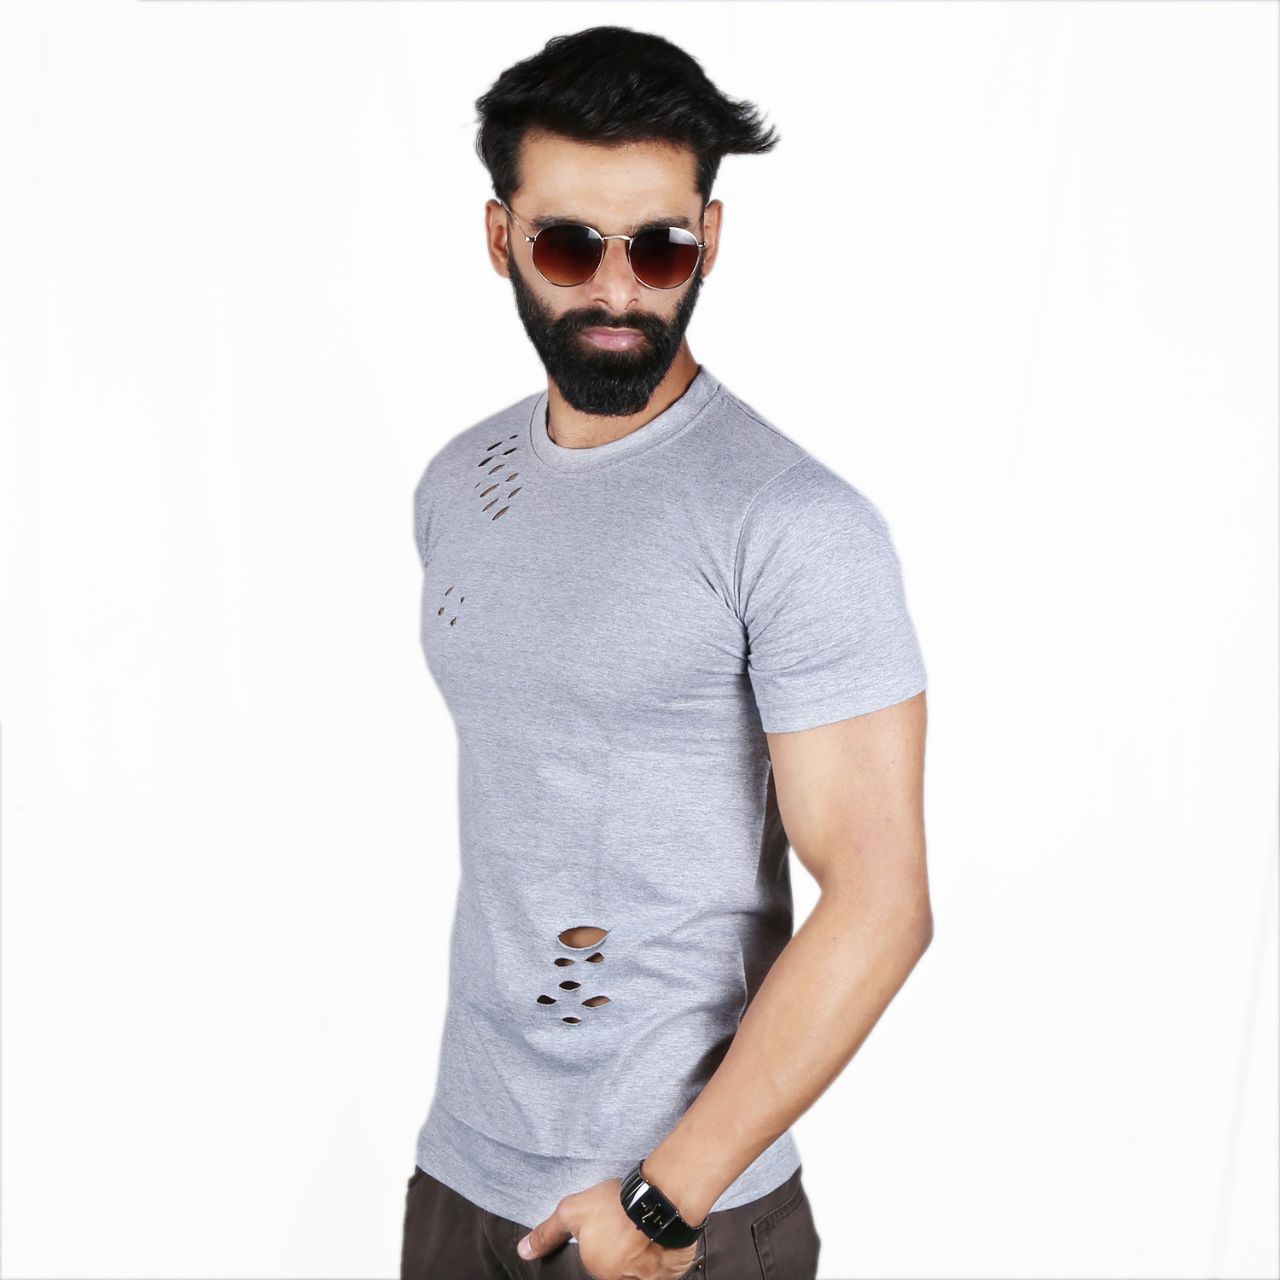 Buy The Royal Swag Men's Cotton Tee- Antra Melange Ripped Torn Online ...